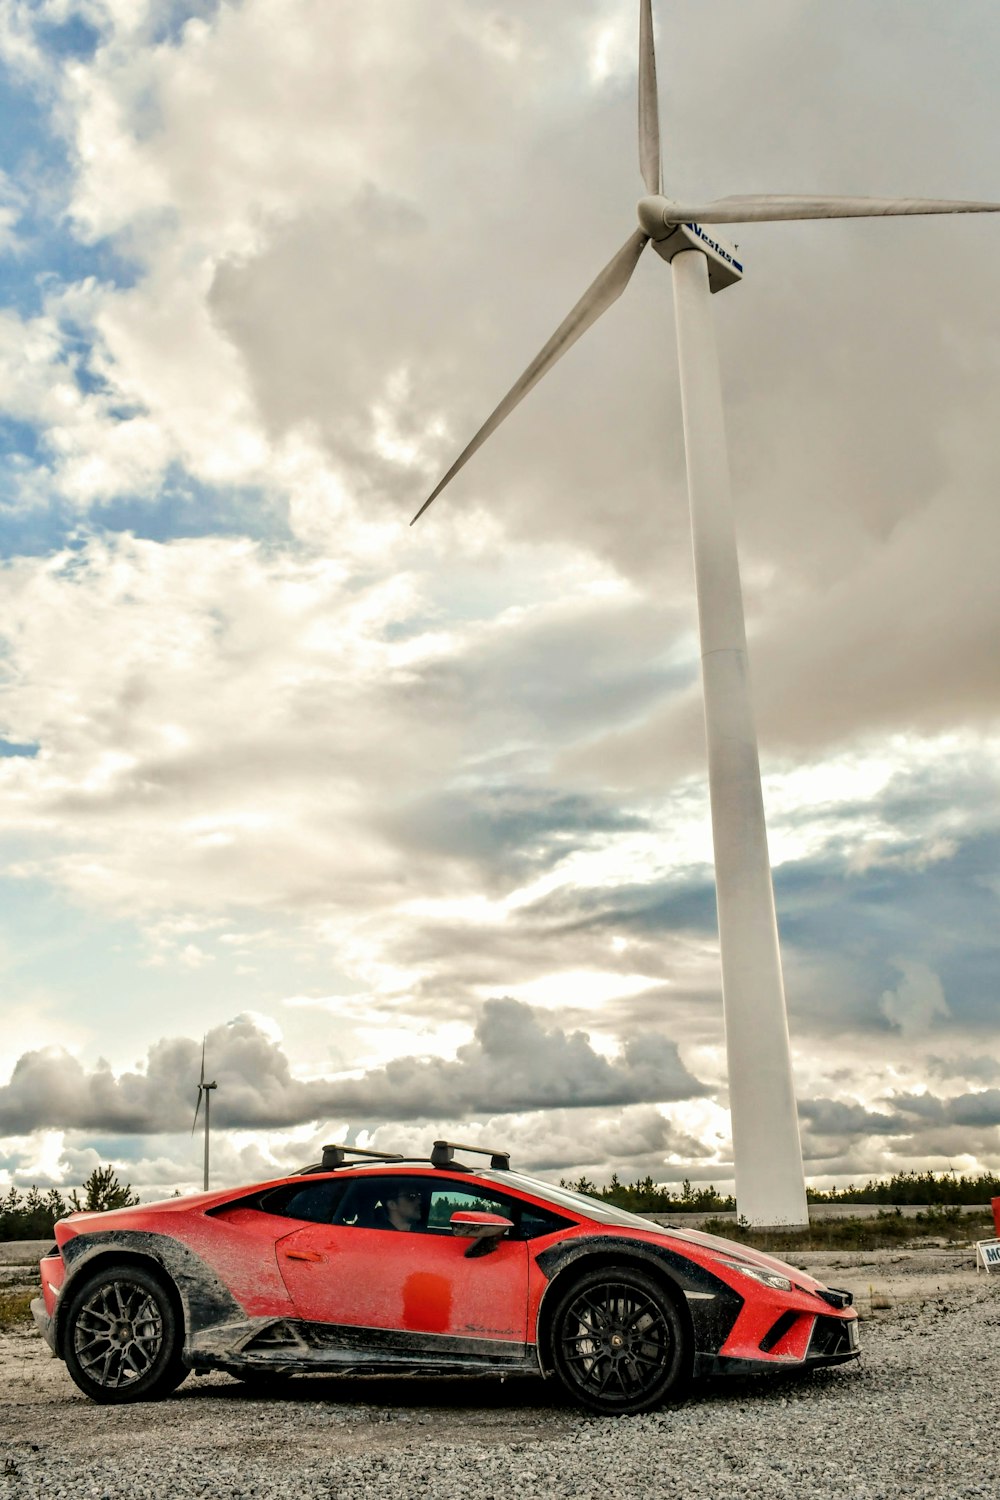 a red sports car parked in front of a wind turbine